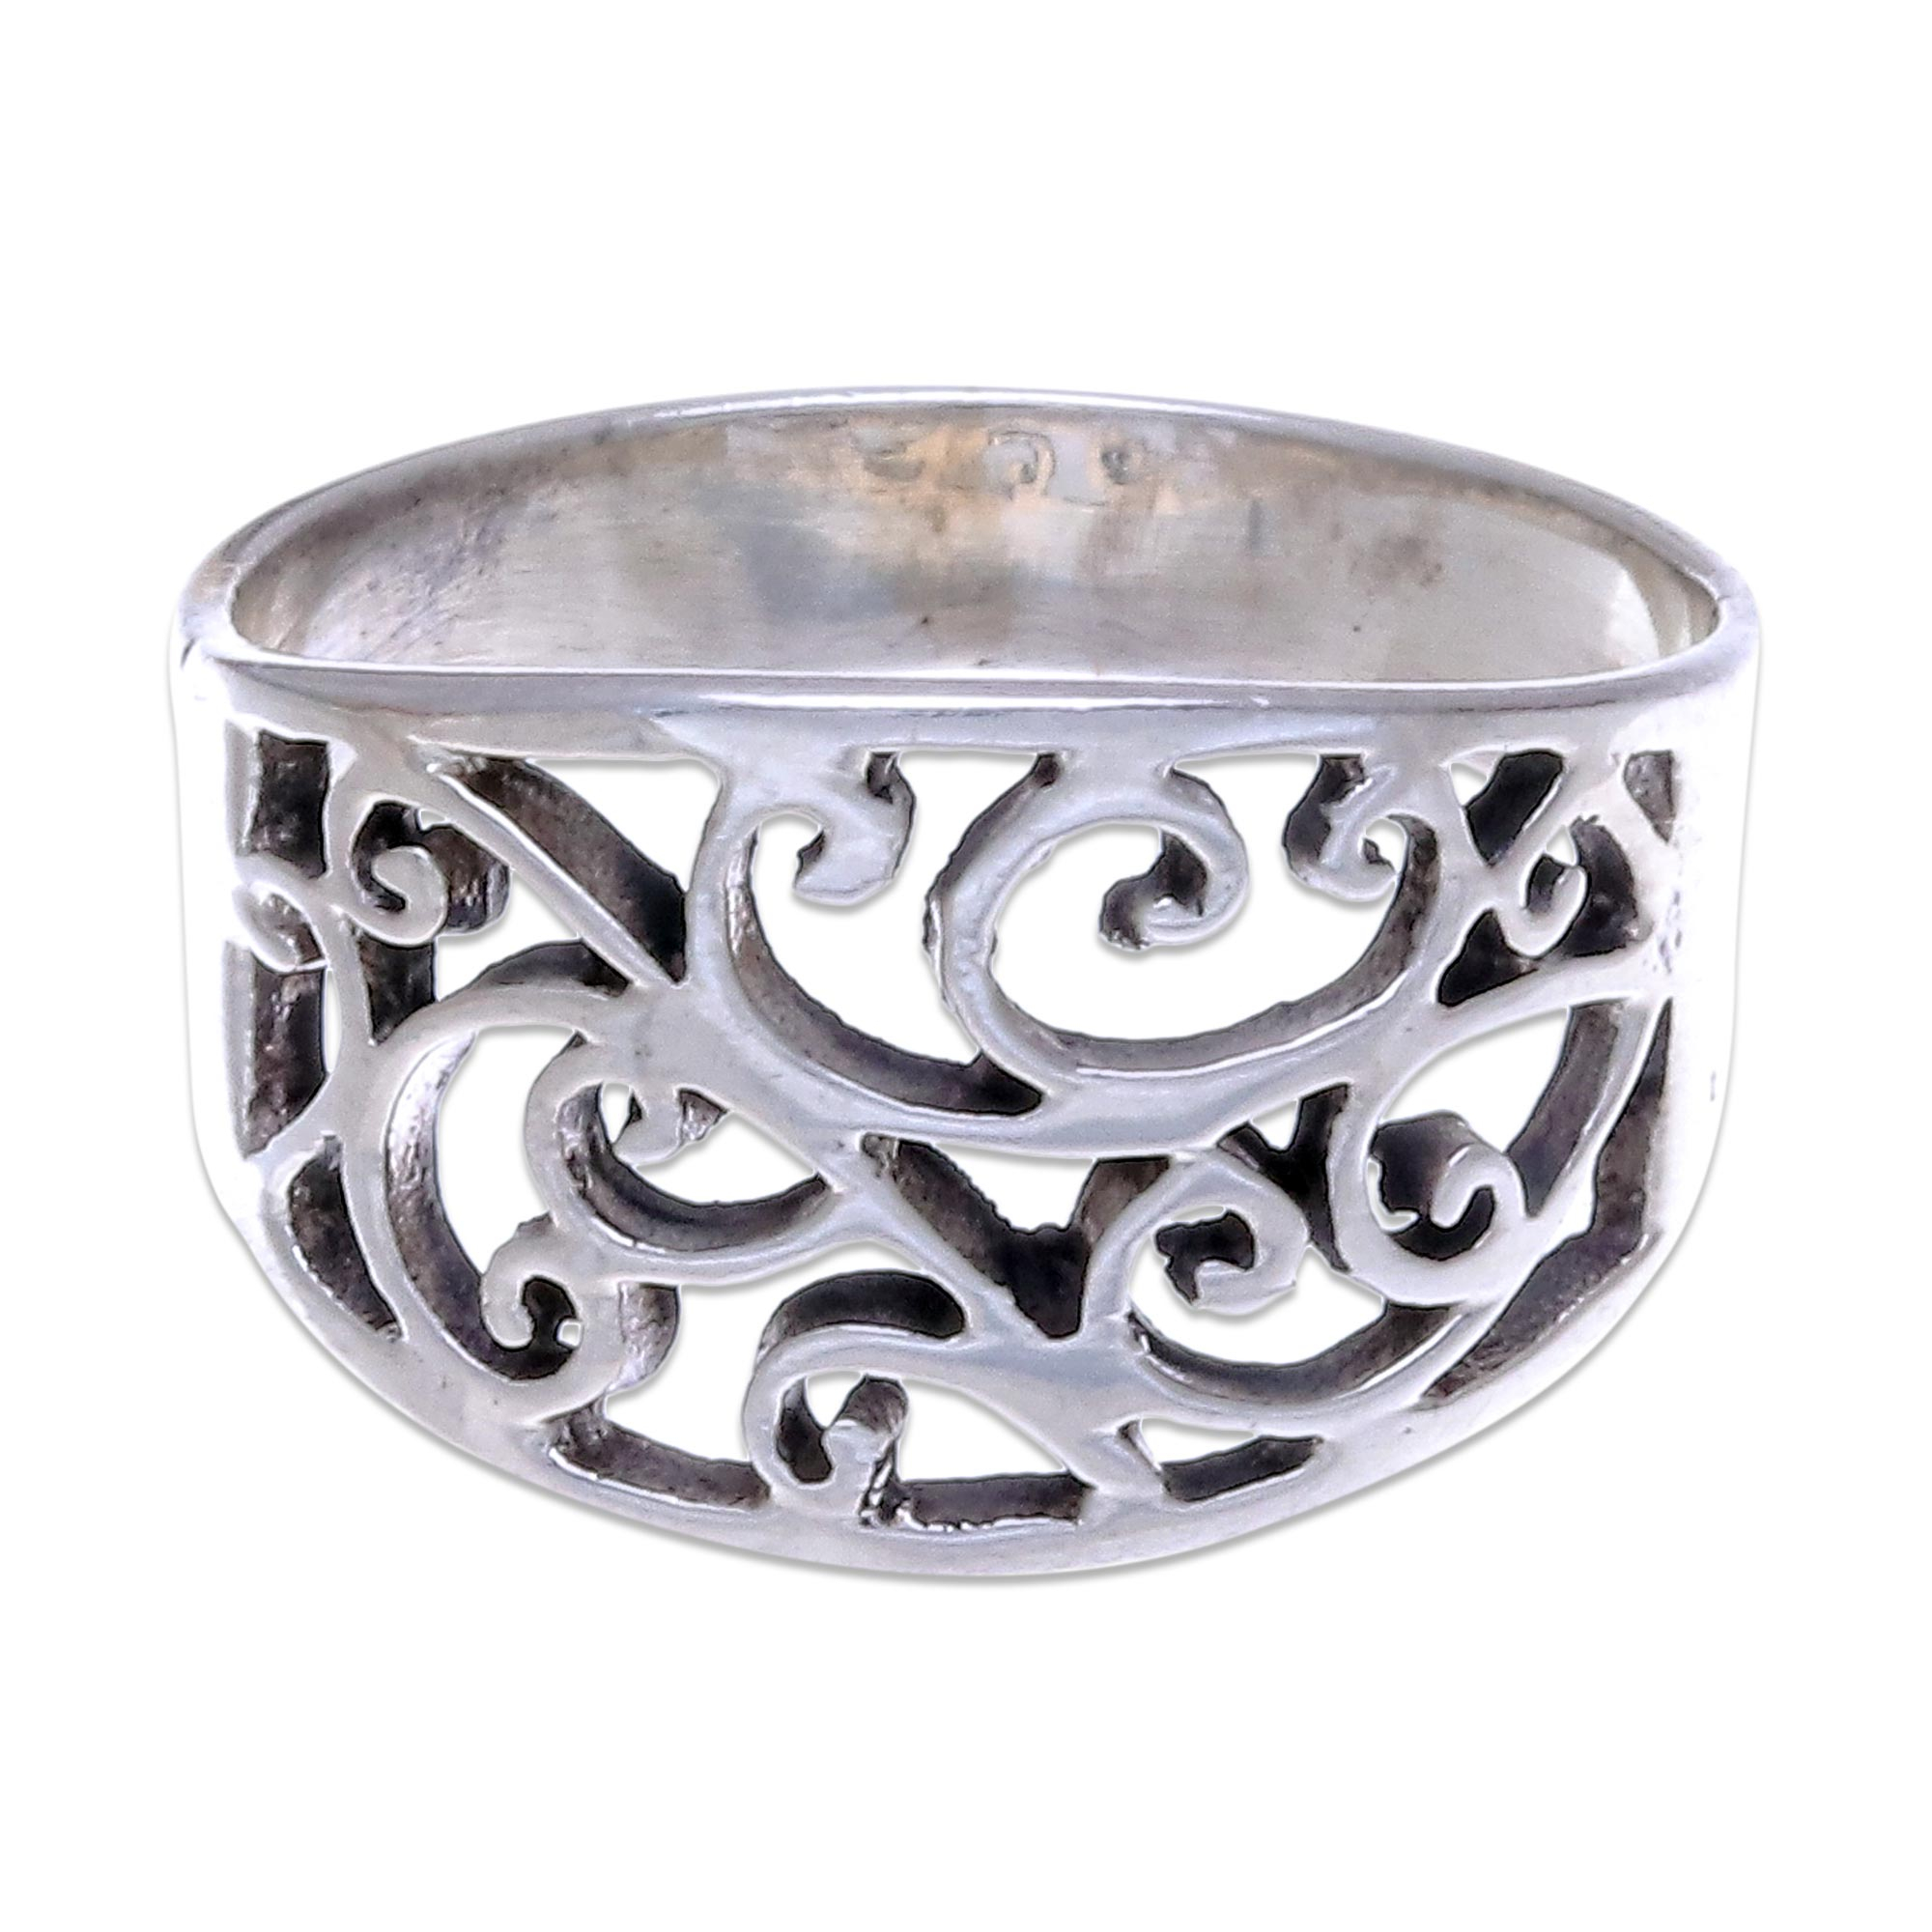 Unique Sterling Silver Band Ring from Thailand - Arabesque | NOVICA